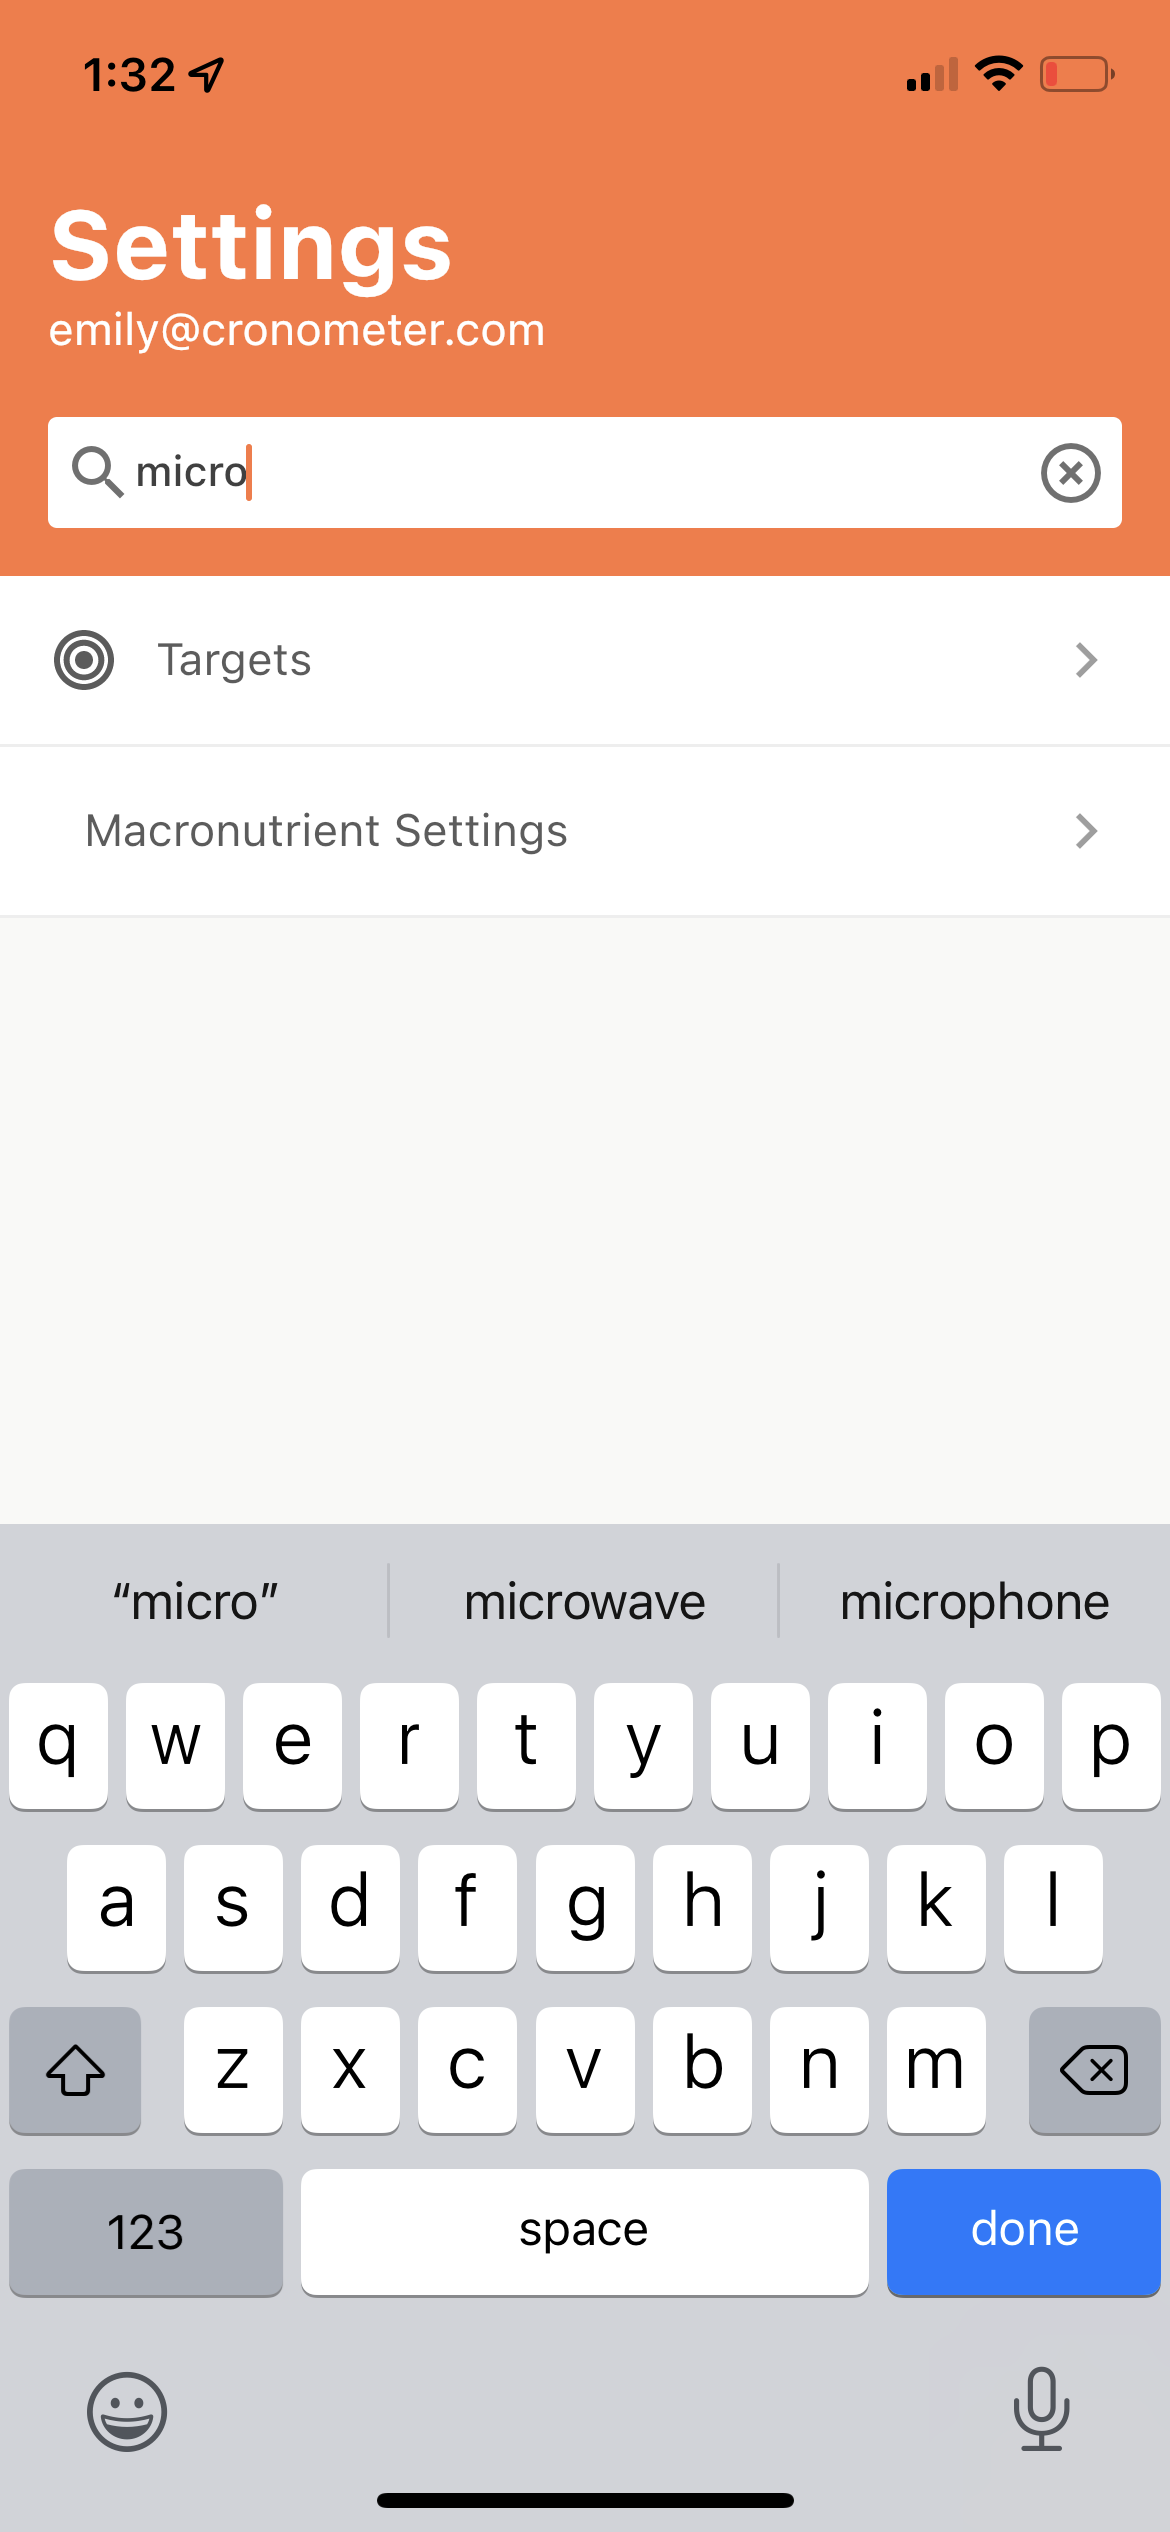 Search for settings in the search bar.